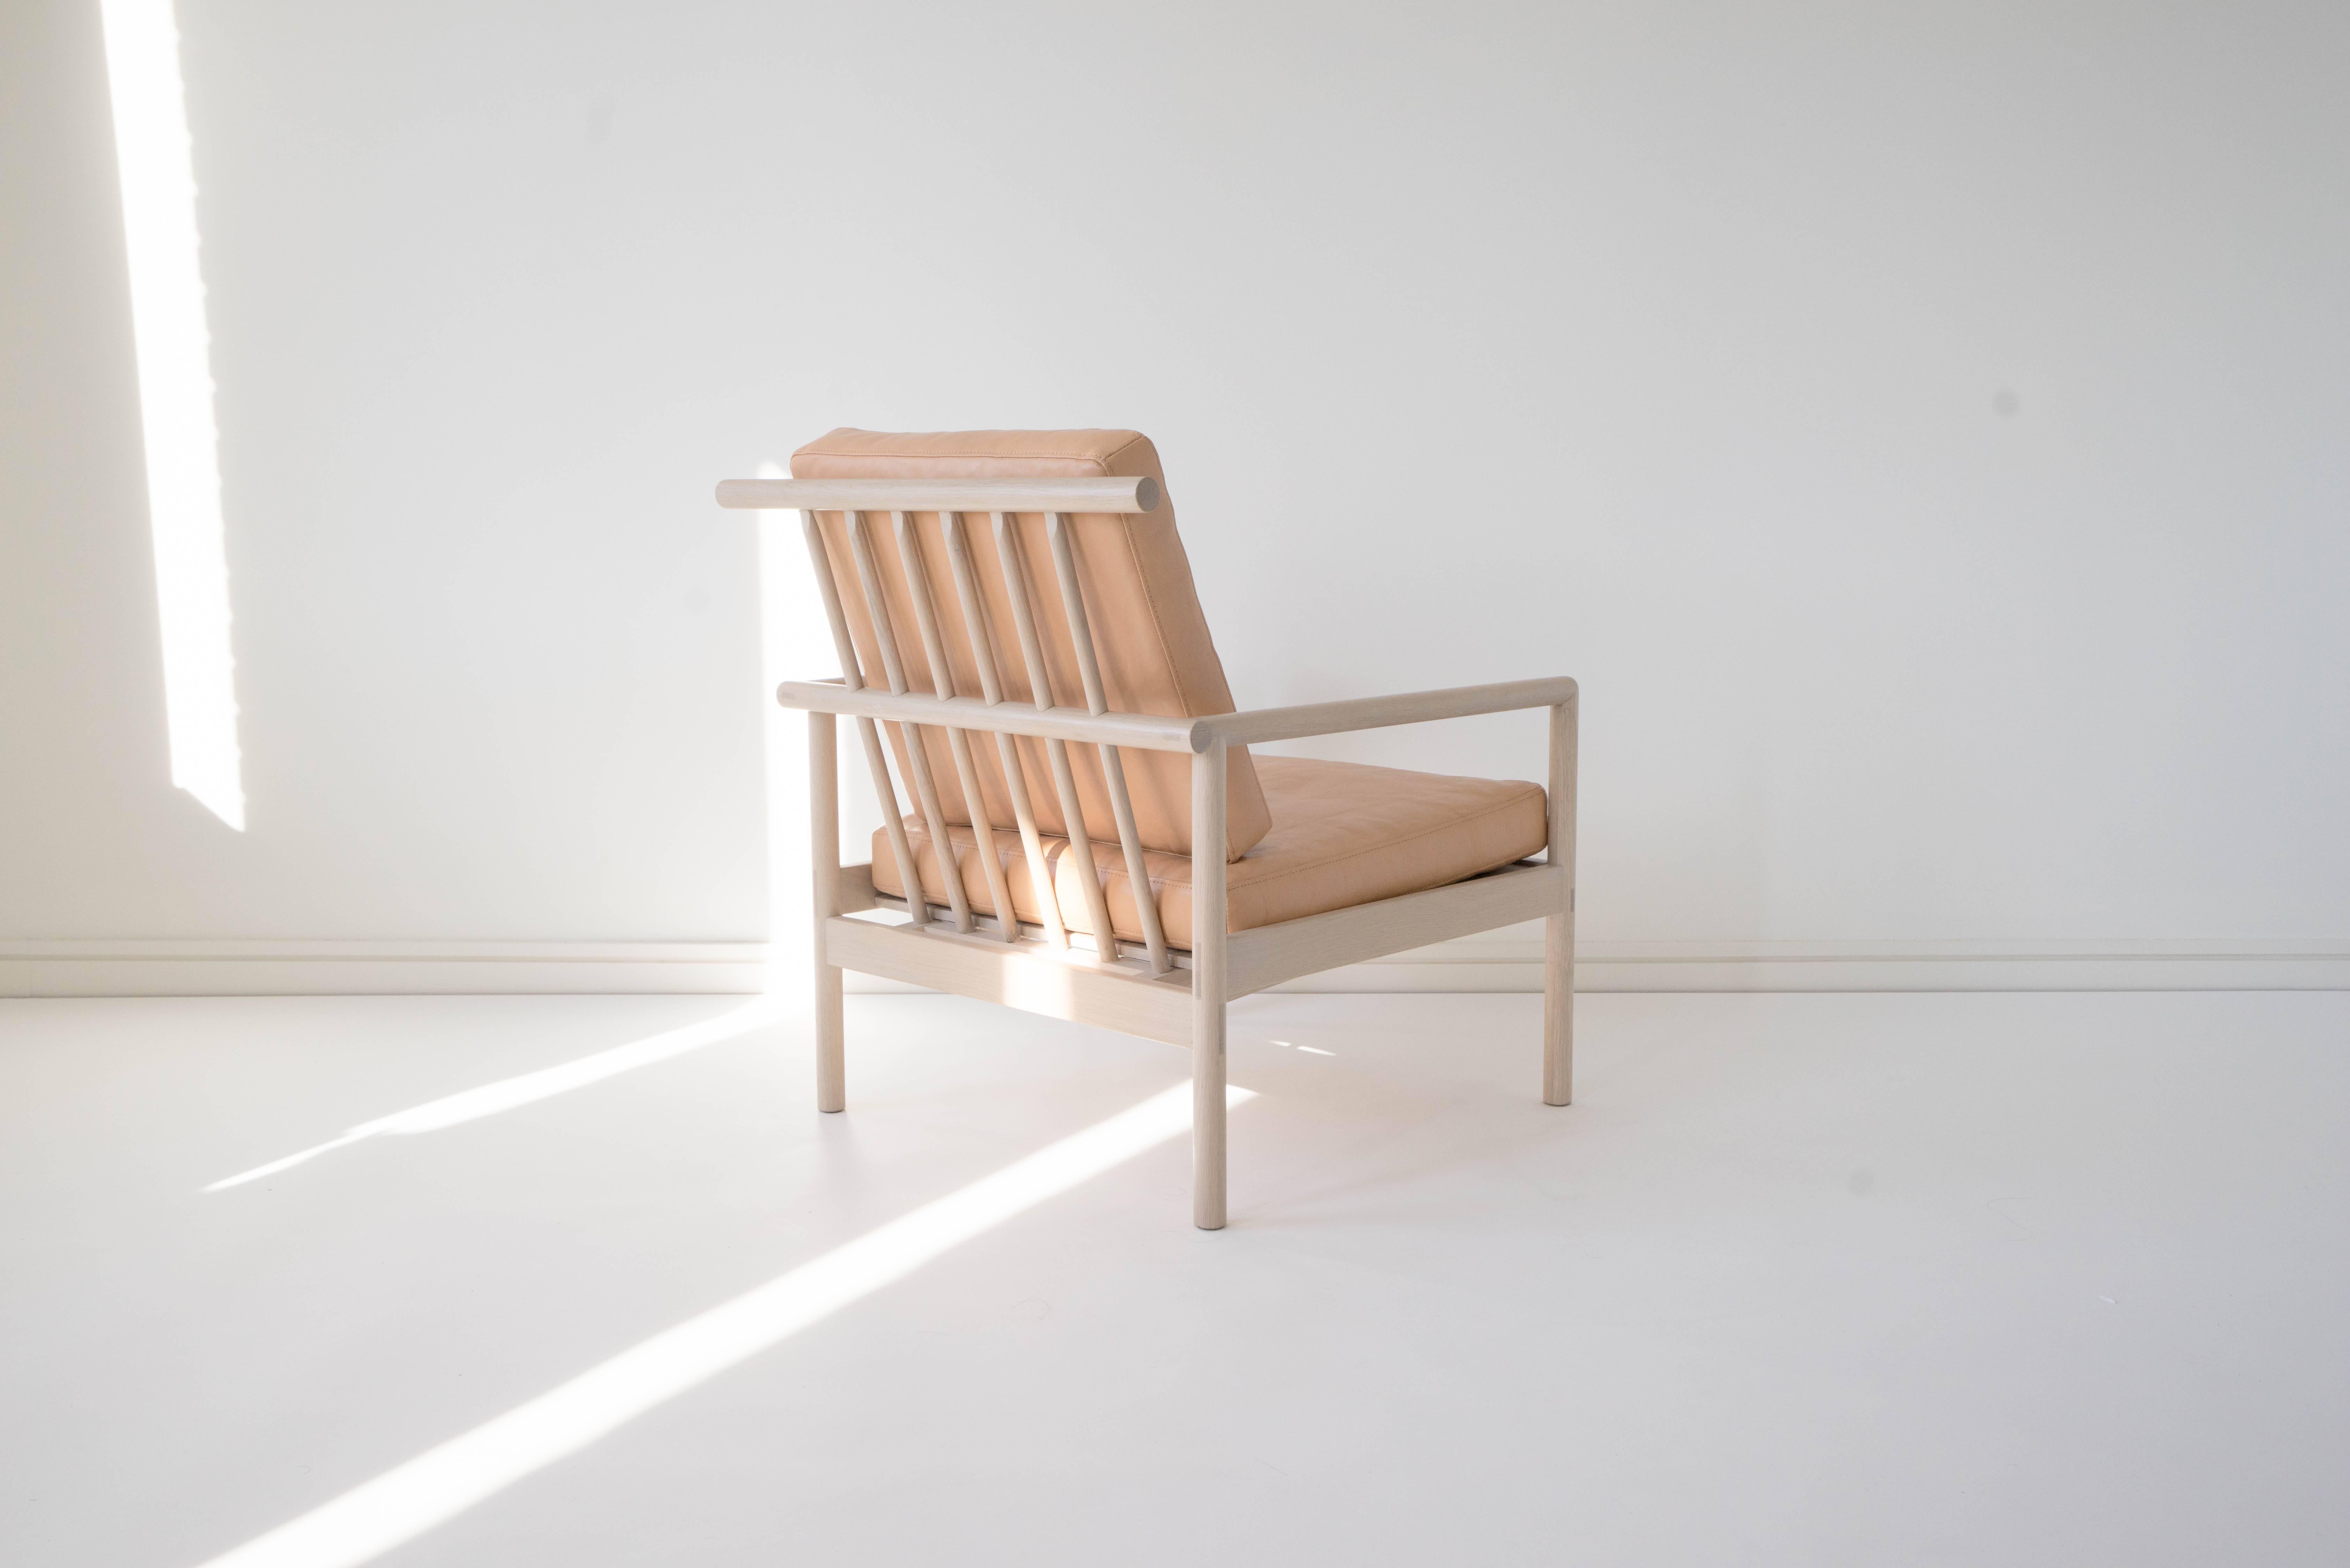 Sun at Six is a contemporary furniture design studio that works with traditional Chinese joinery masters to handcraft our pieces using traditional joinery. Vegetable tanned leather will patina with age. Exposed joinery throughout.

Great furniture